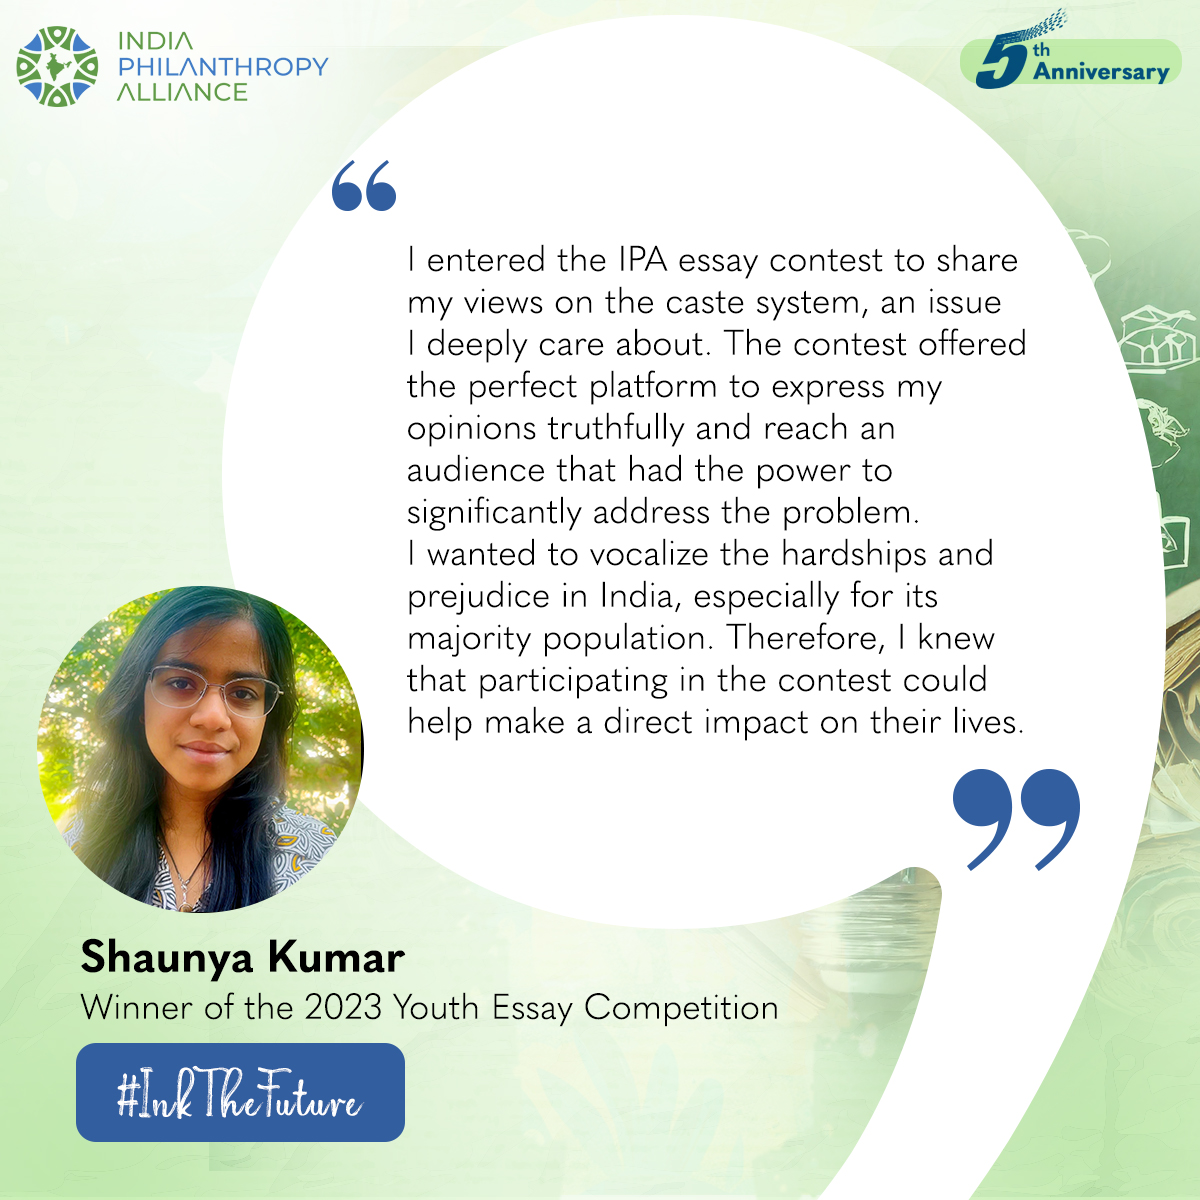 As the winning submission of last year’s Youth Essay Competition, Shaunya’s essay delved into the Indian caste system, and the potential role we can play in resolving developmental issues in India. Through her participation, Shaunya was able to raise awareness on the topic &